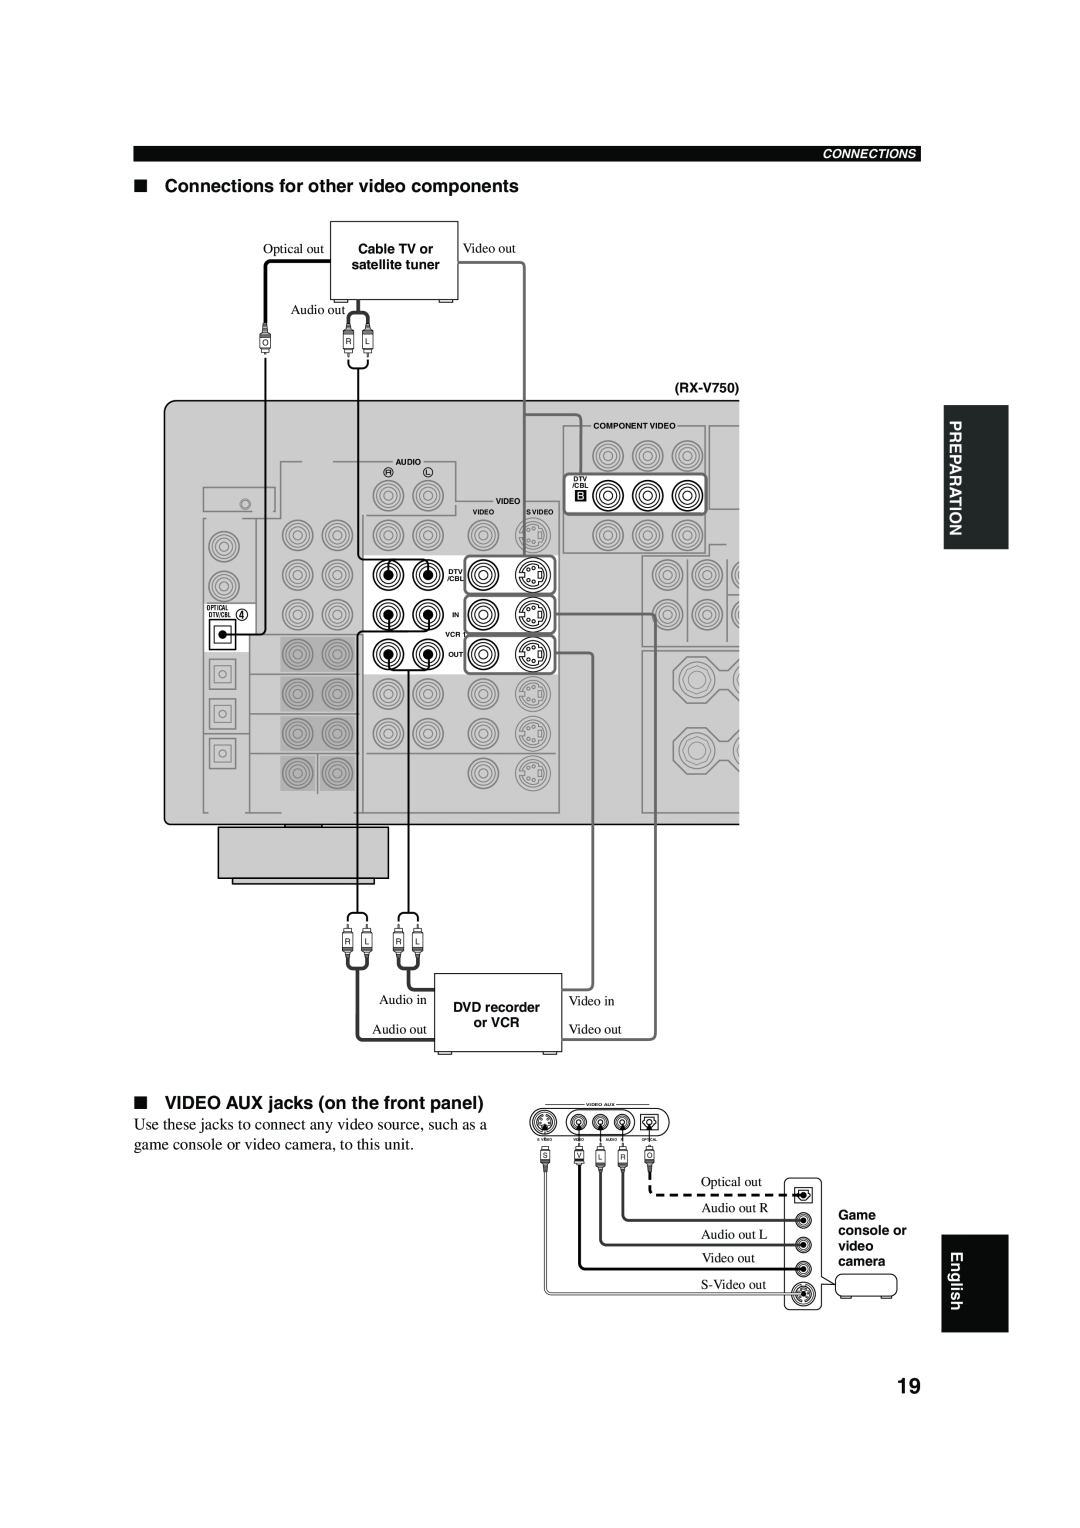 Yamaha DSP-AX750SE Connections for other video components, VIDEO AUX jacks on the front panel, satellite tuner, Audio out 